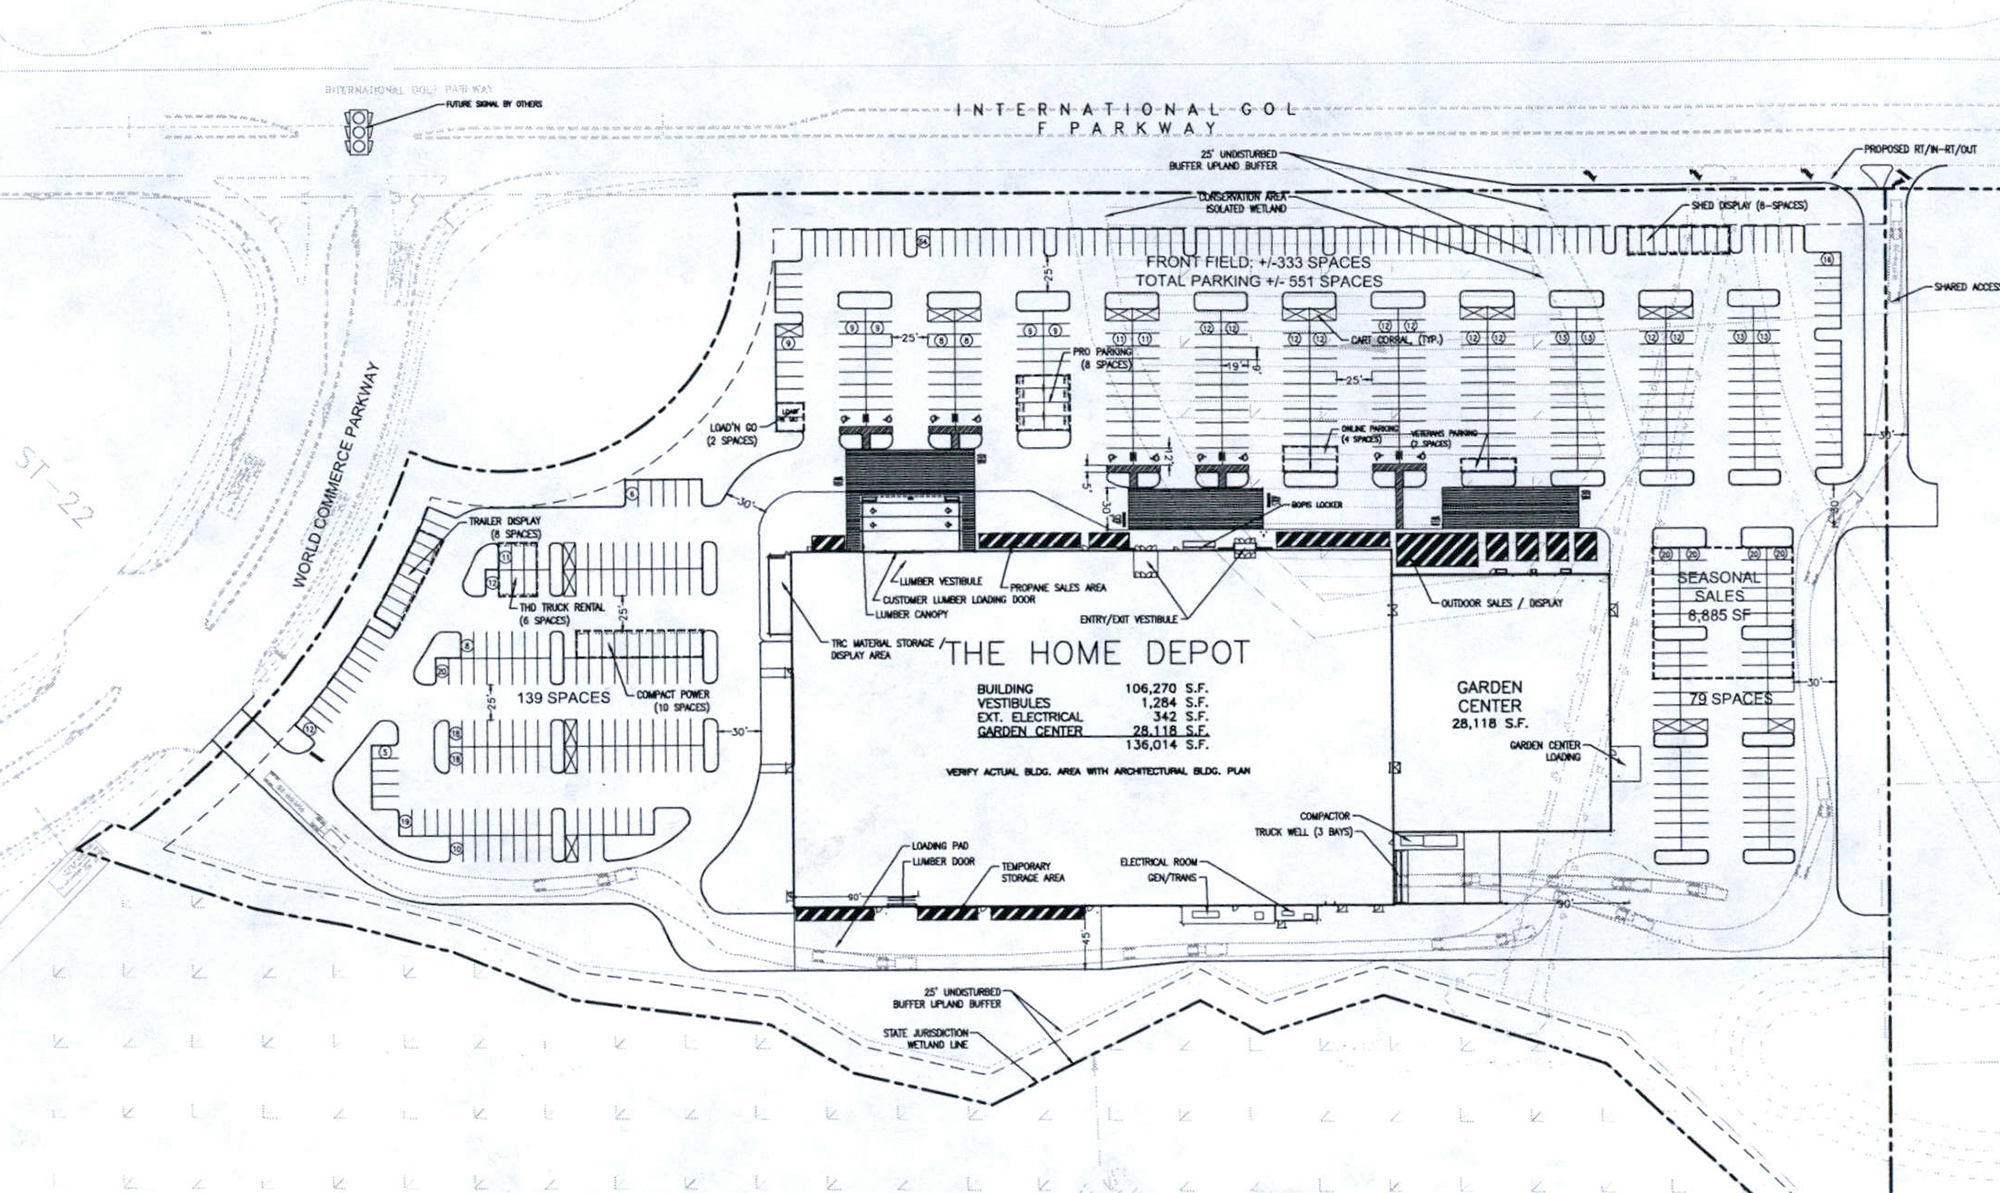 The site plan for The Home Depot.